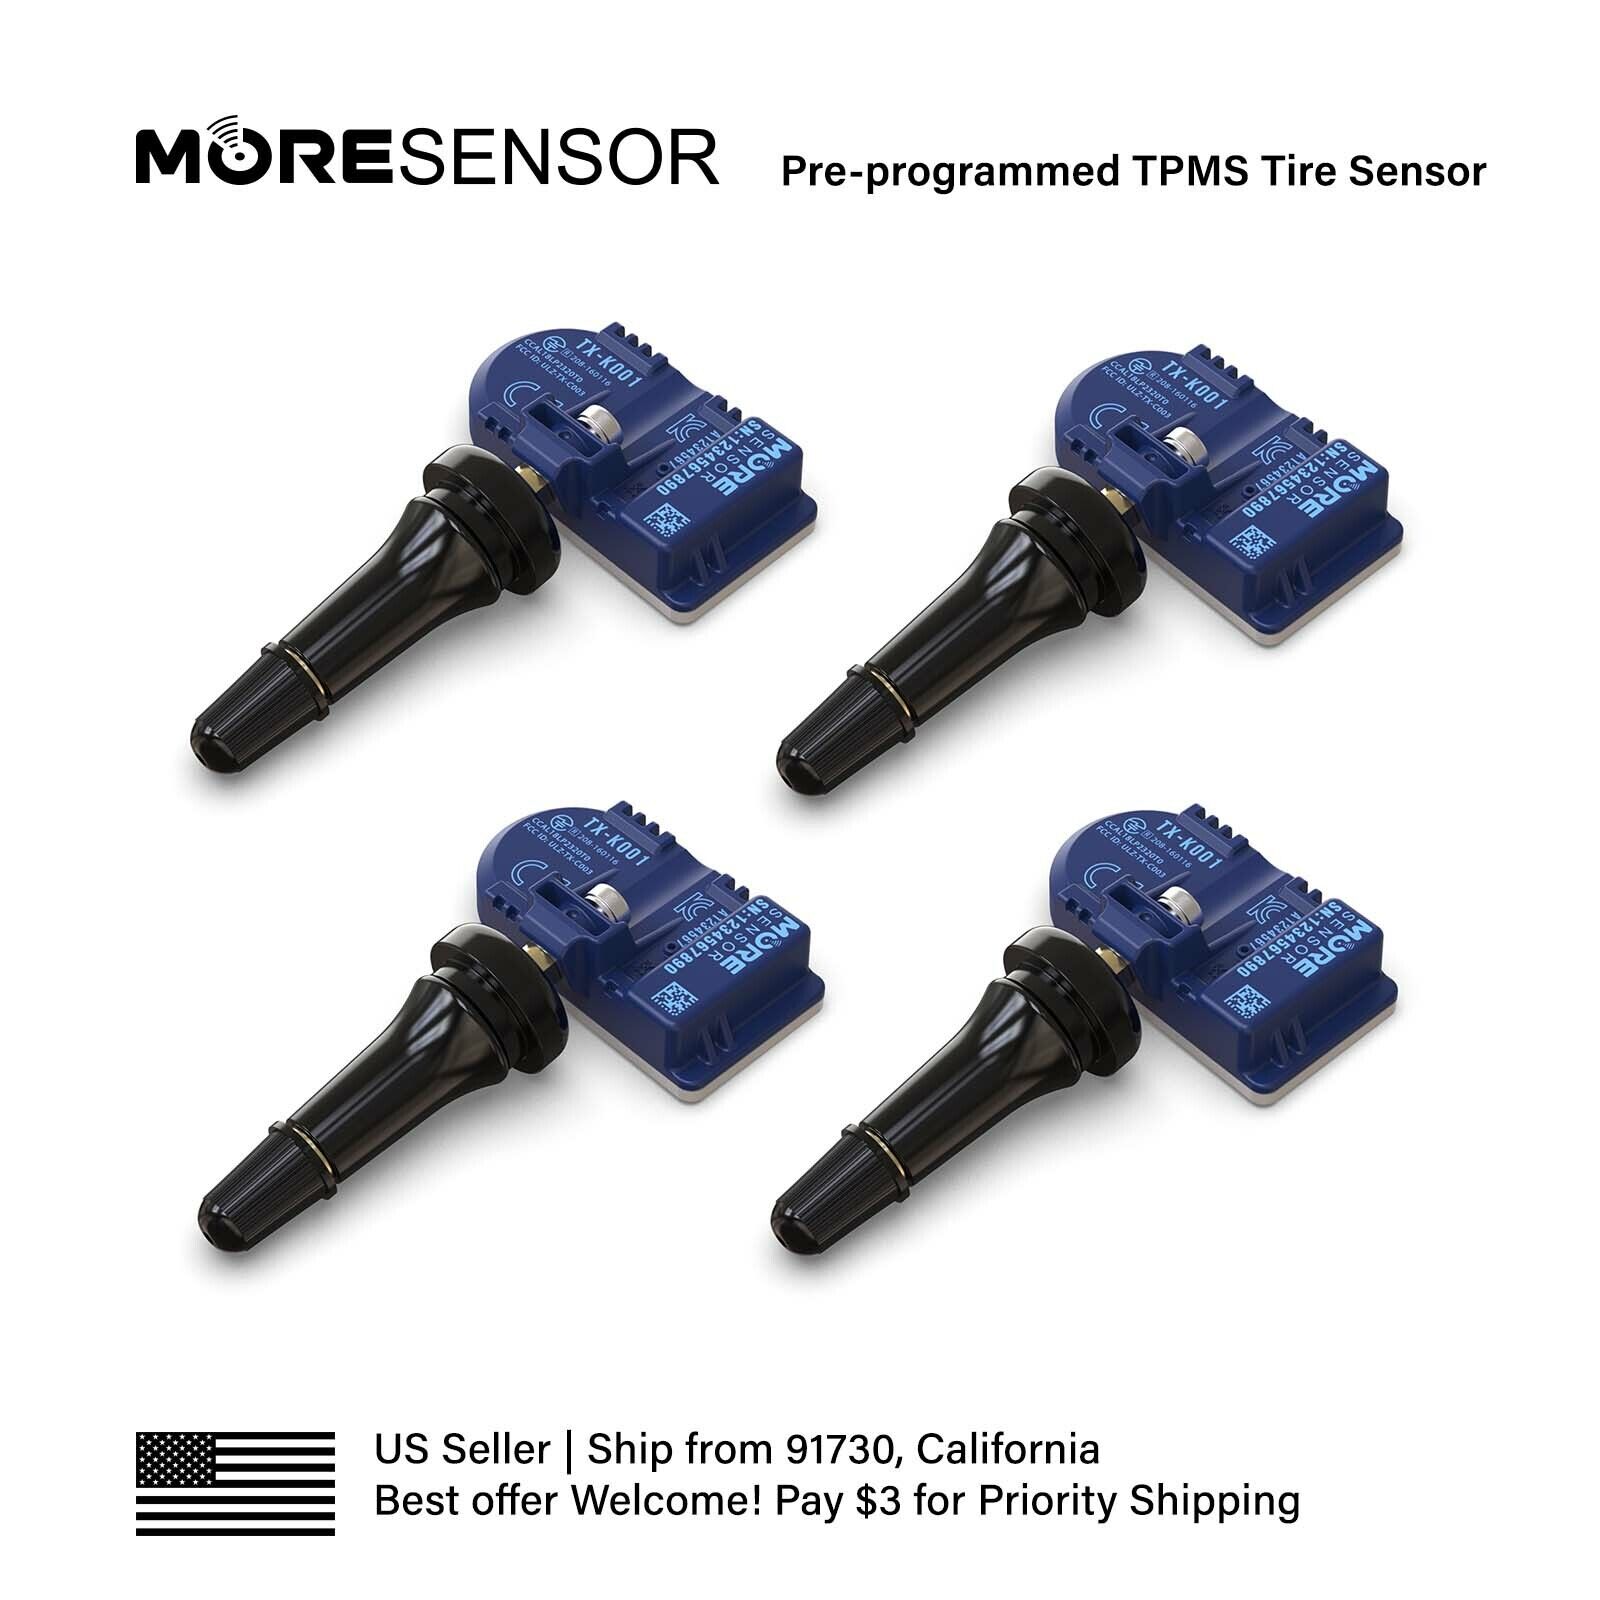 4PC 315MHz MORESENSOR TPMS Snap-in Tire Sensor for 529333X200 Replacement